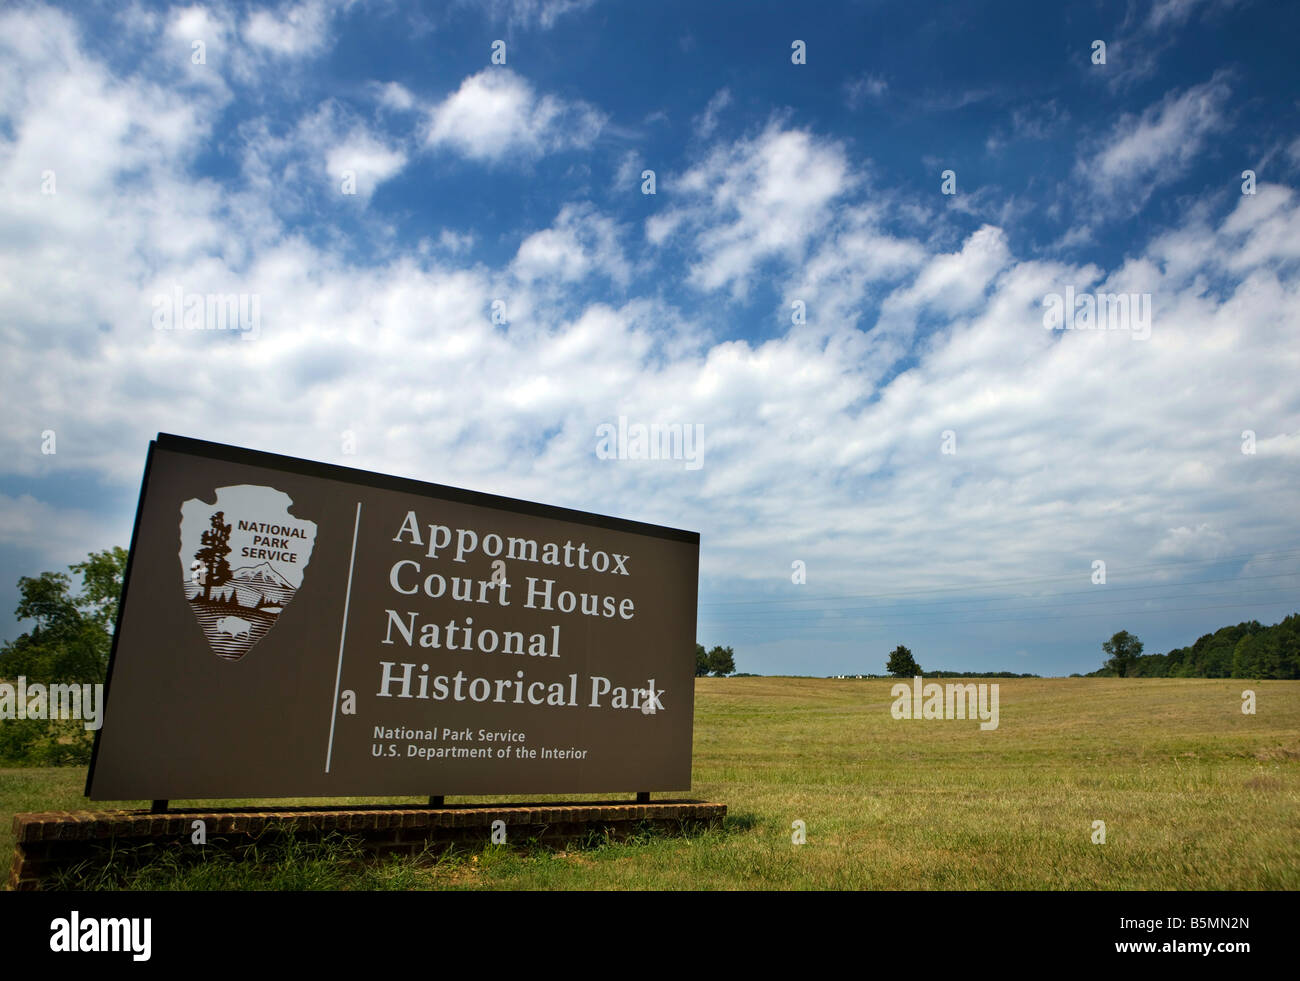 National Park Service welcome sign, Appomattox Court House National Historical Park, Appomattox, Virginia. Stock Photo